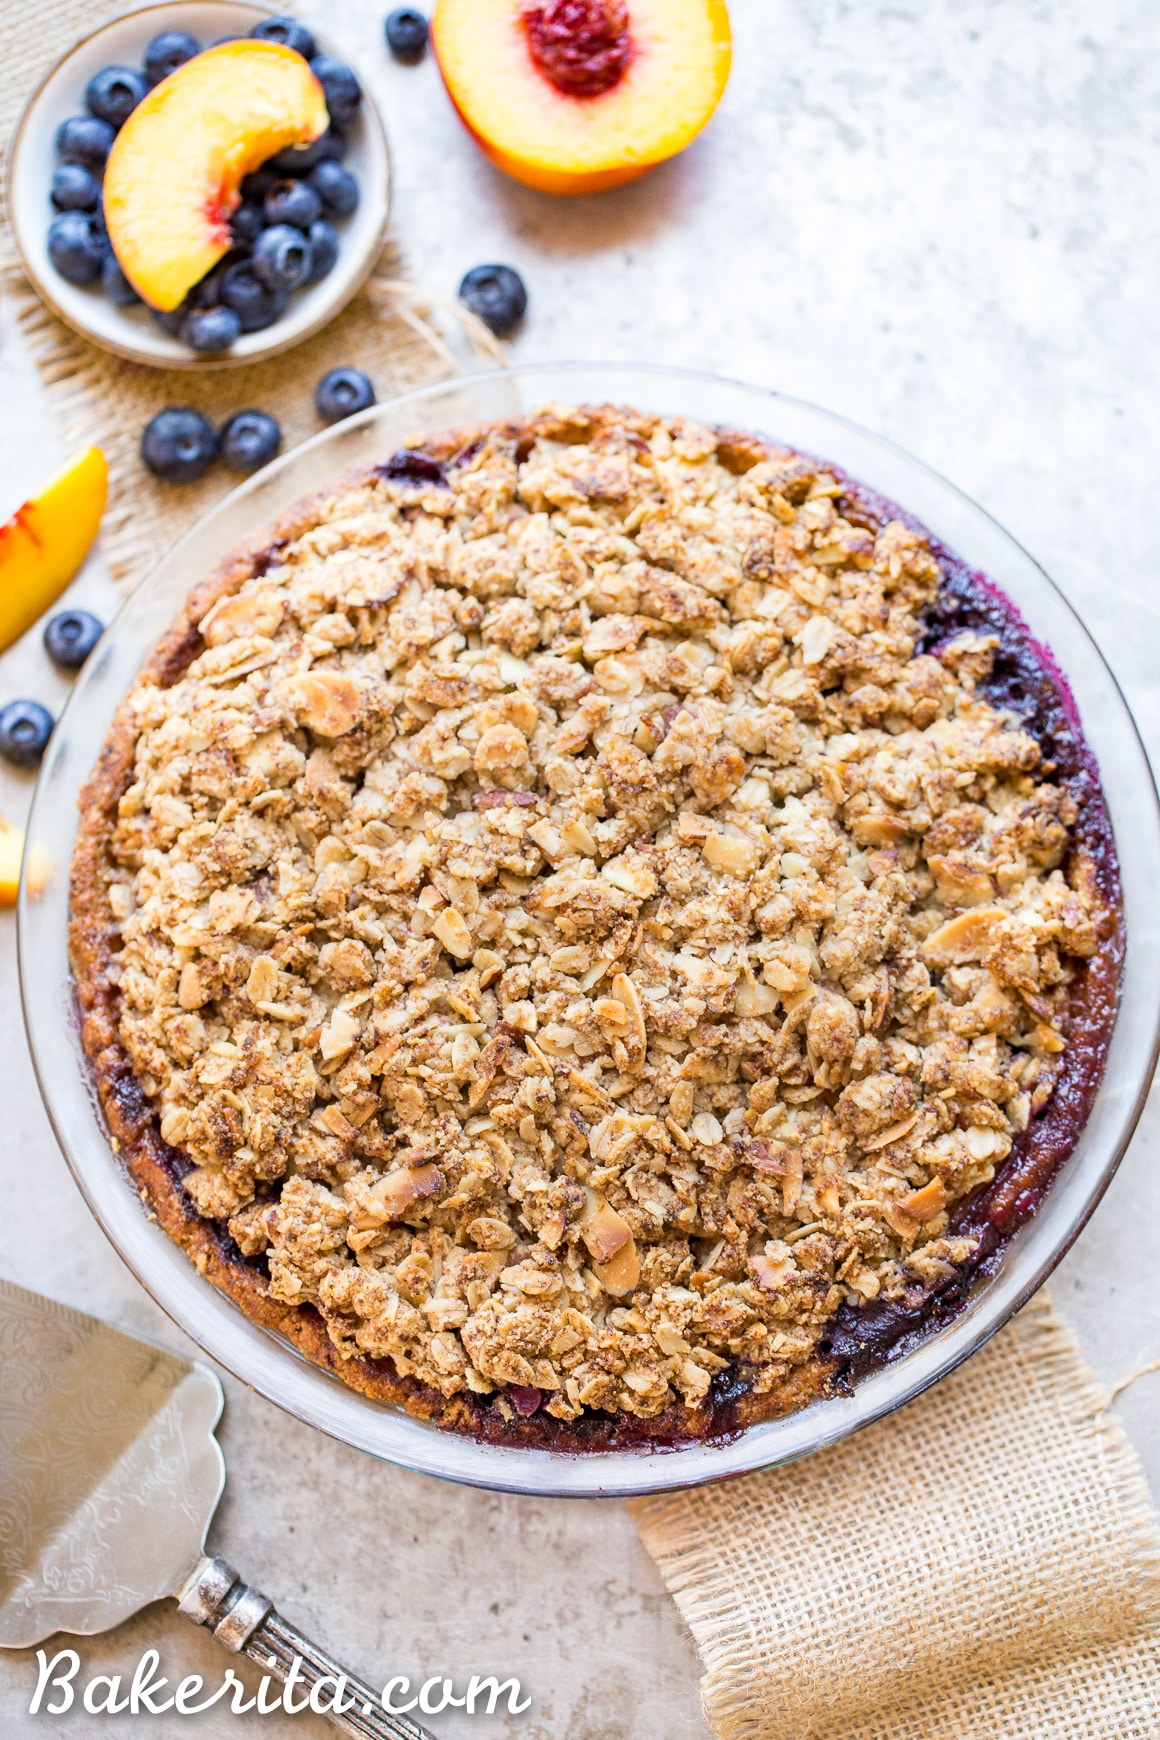 This Blueberry Nectarine Pie is the epitome of summer, and it has a delicious oatmeal almond crumble on top! This gluten free and refined sugar free pie is sure to be a favorite.